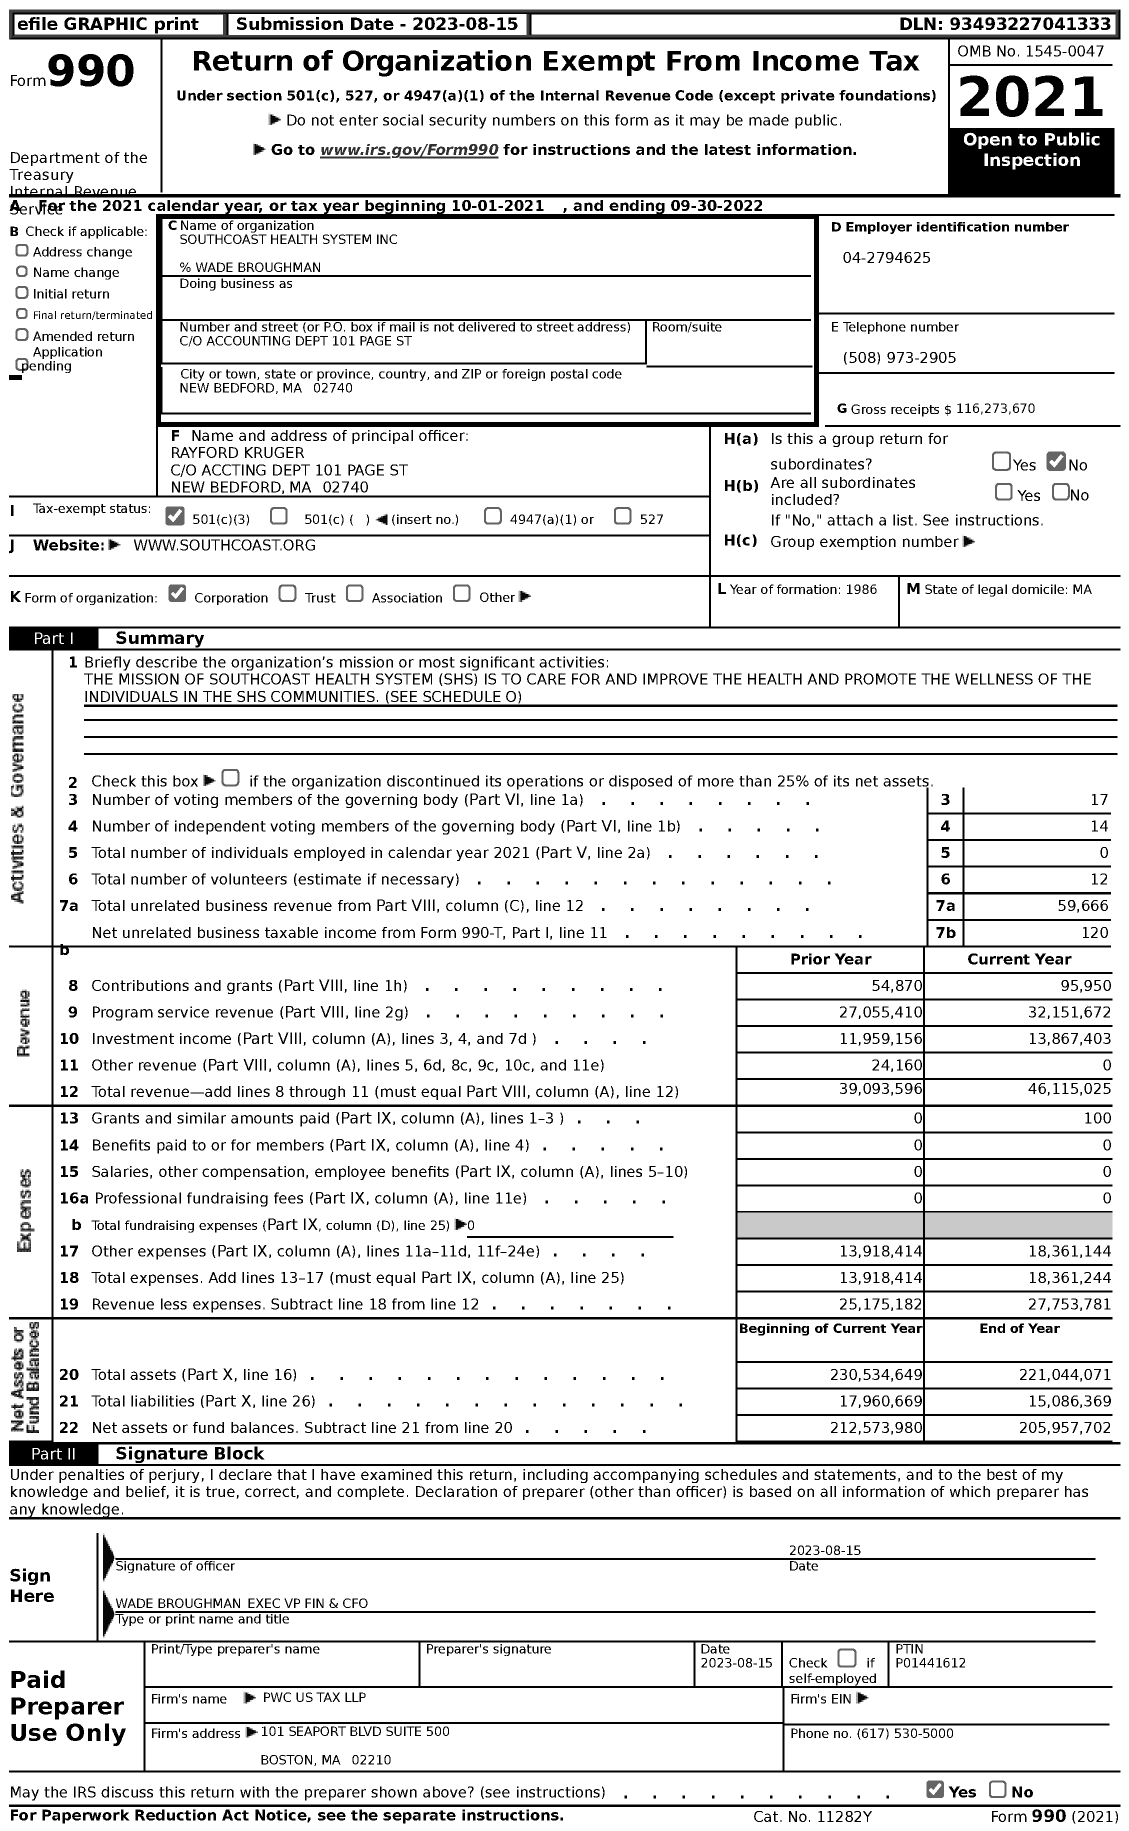 Image of first page of 2021 Form 990 for Southcoast Health